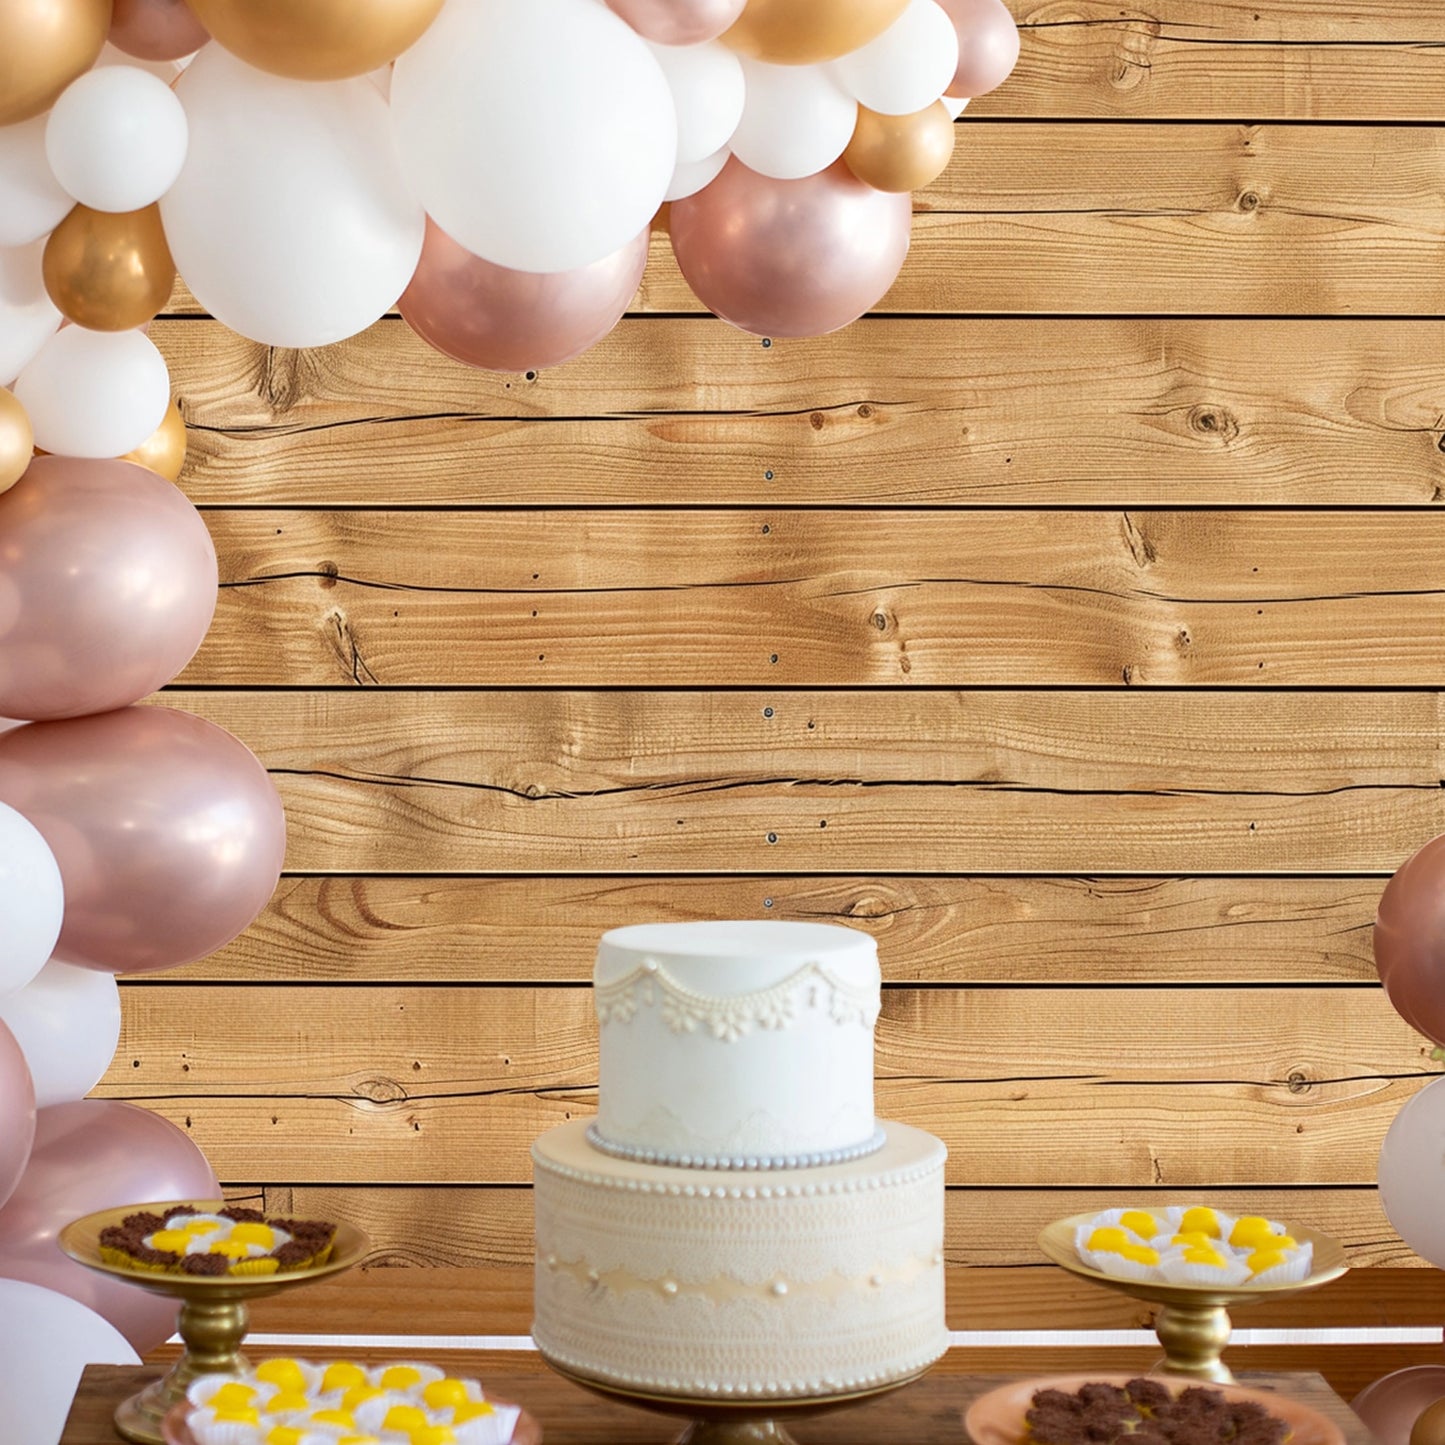 A white tiered cake on a wooden table with two plates of desserts on either side. A balloon garland in shades of white, gold, and rose gold decorates the 7x5ft Retro Wood Graduate Wall Background Wooden Backdrop Studio Props for Baby Shower Birthday Photography by ideasbackdrop.